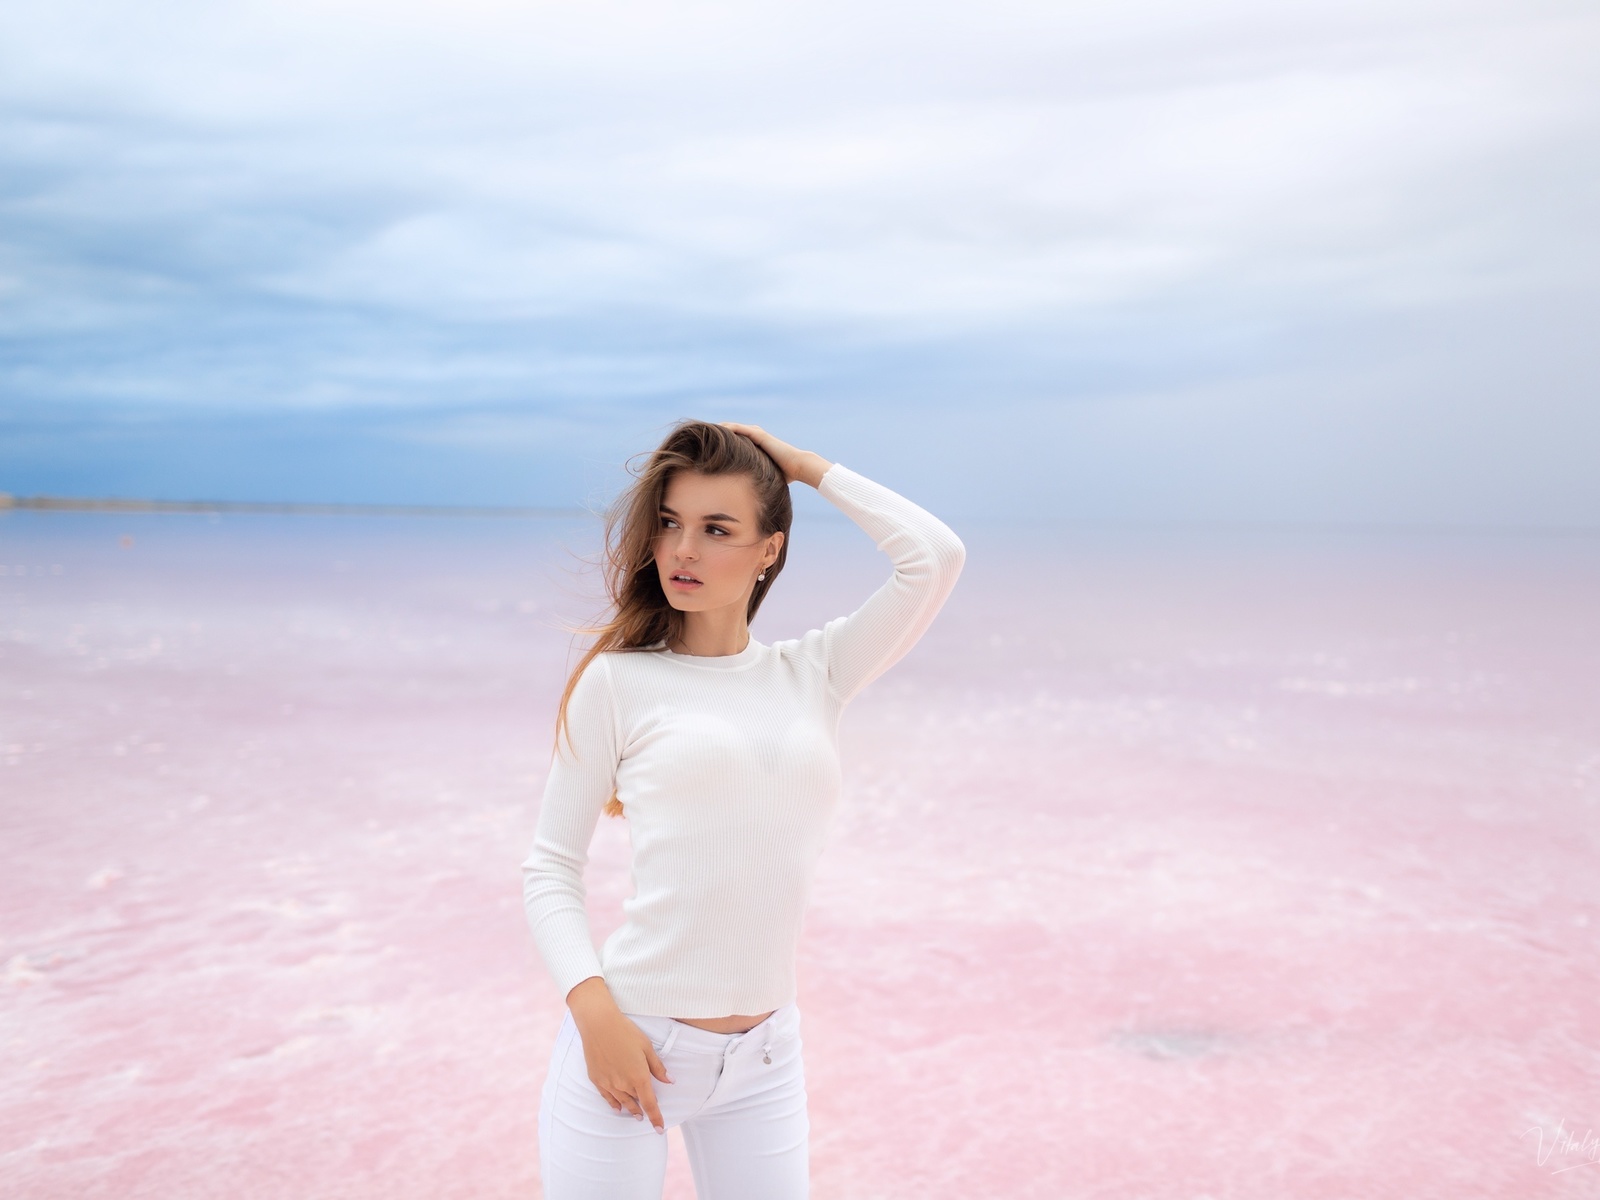 women, vitaly skitaev, white clothing, jeans, sky, clouds, women outdoors, water, looking away